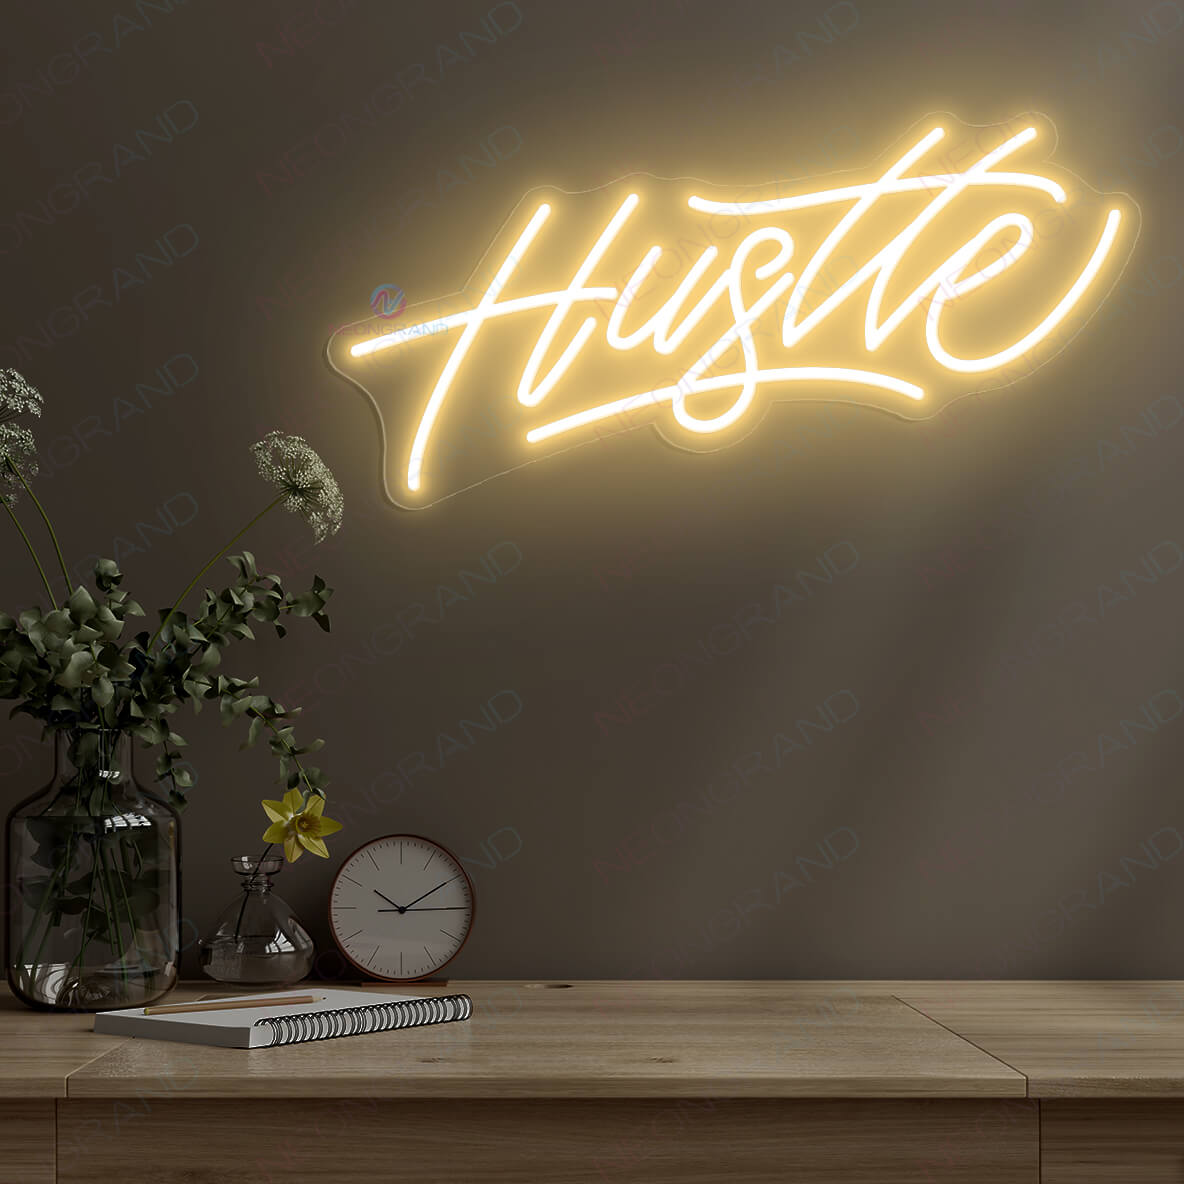 Hustle Neon Sign Wall Led Light gold yellow